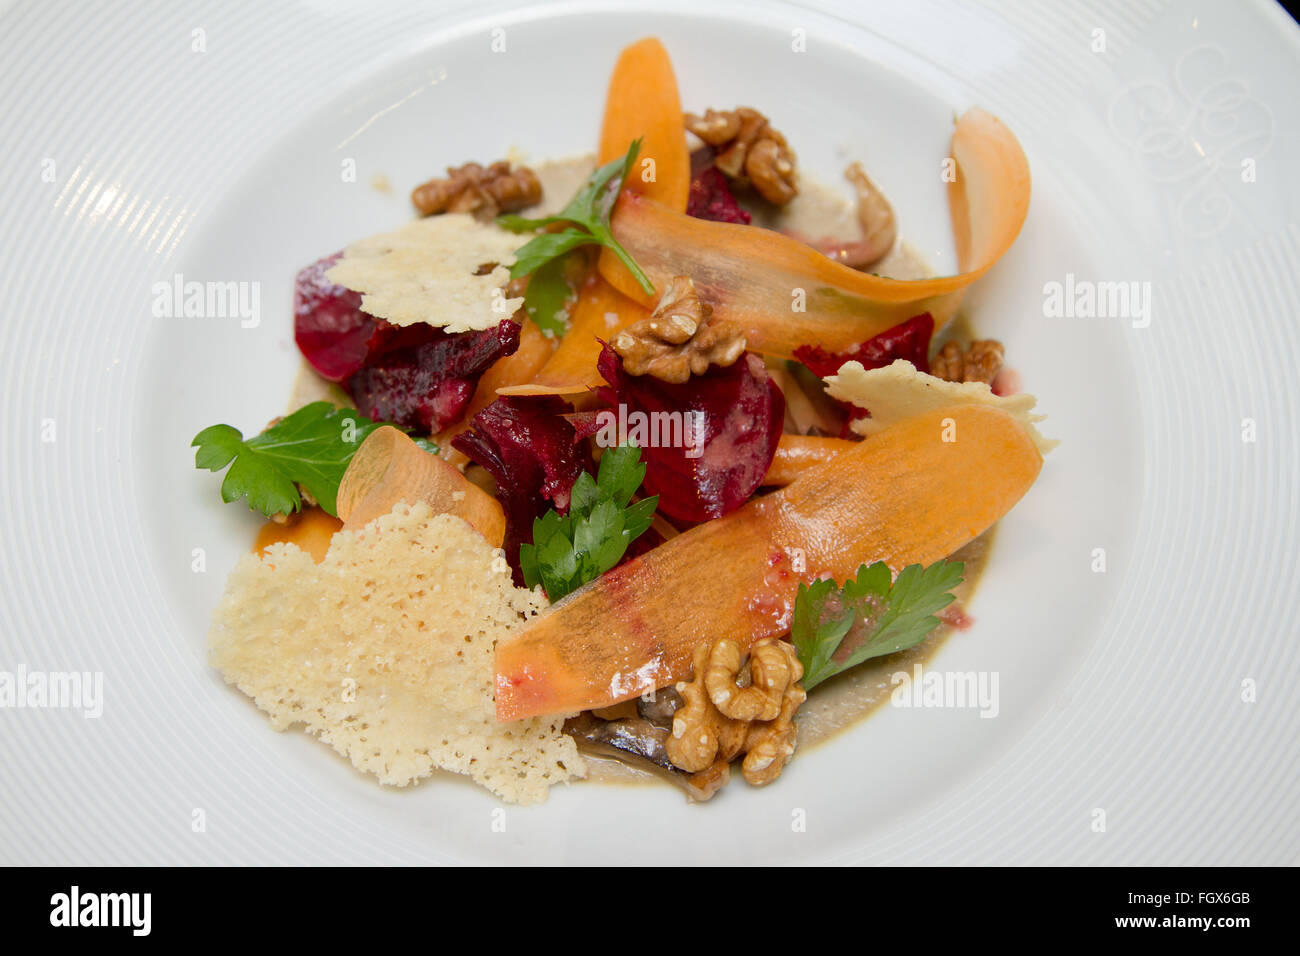 Healthy salad with greens, parmesan and walnuts Stock Photo